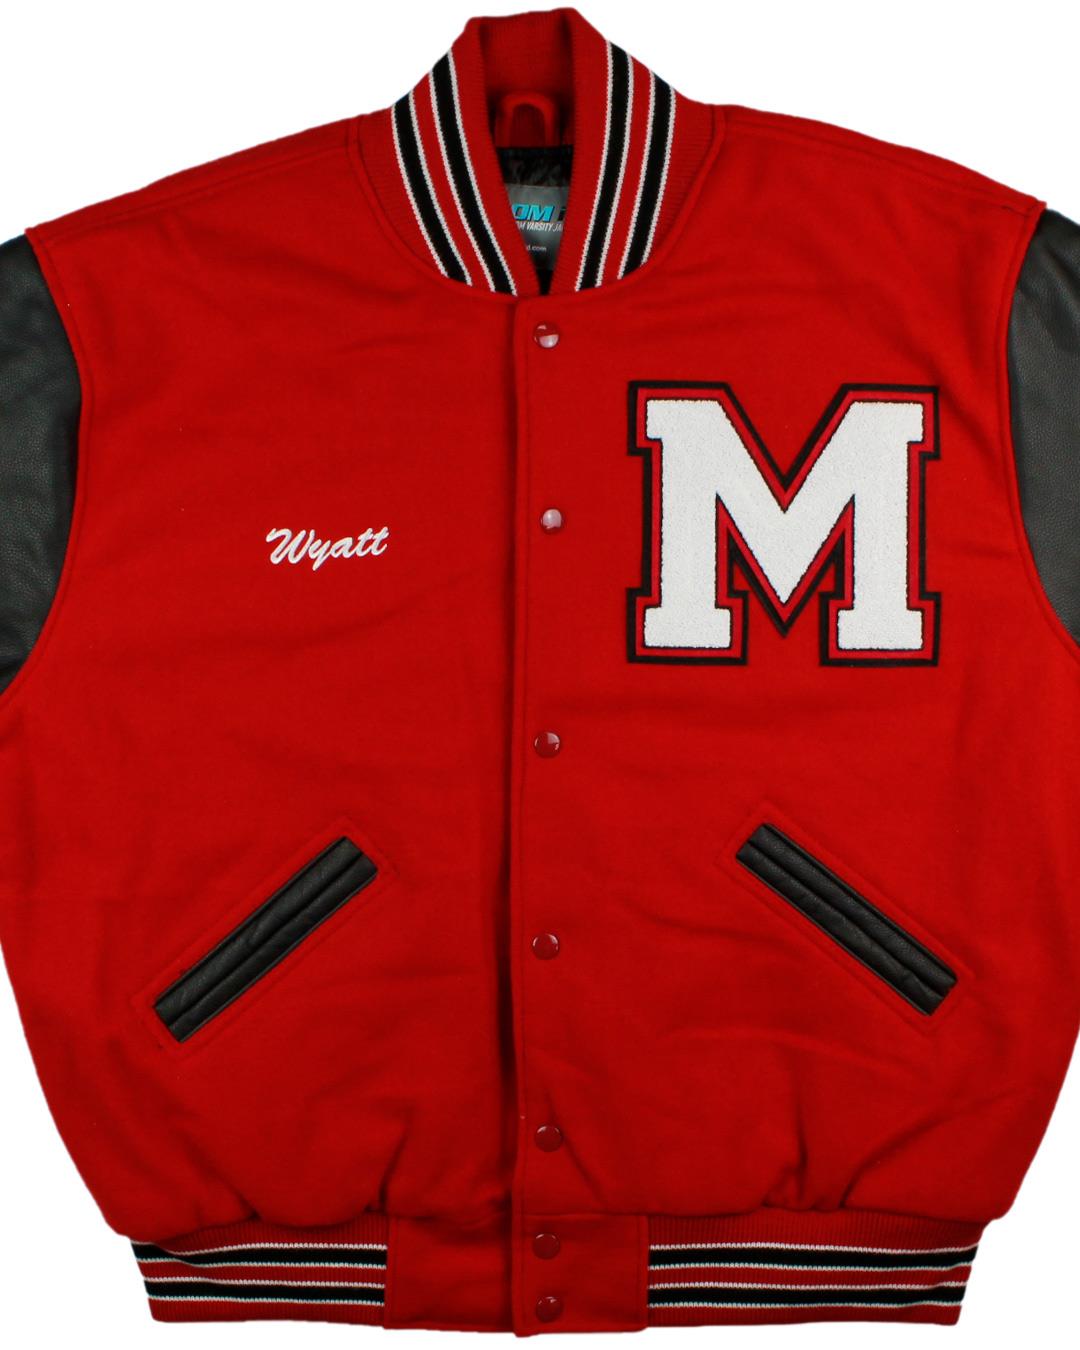 Moscow High School Letterman, Moscow, ID - Front